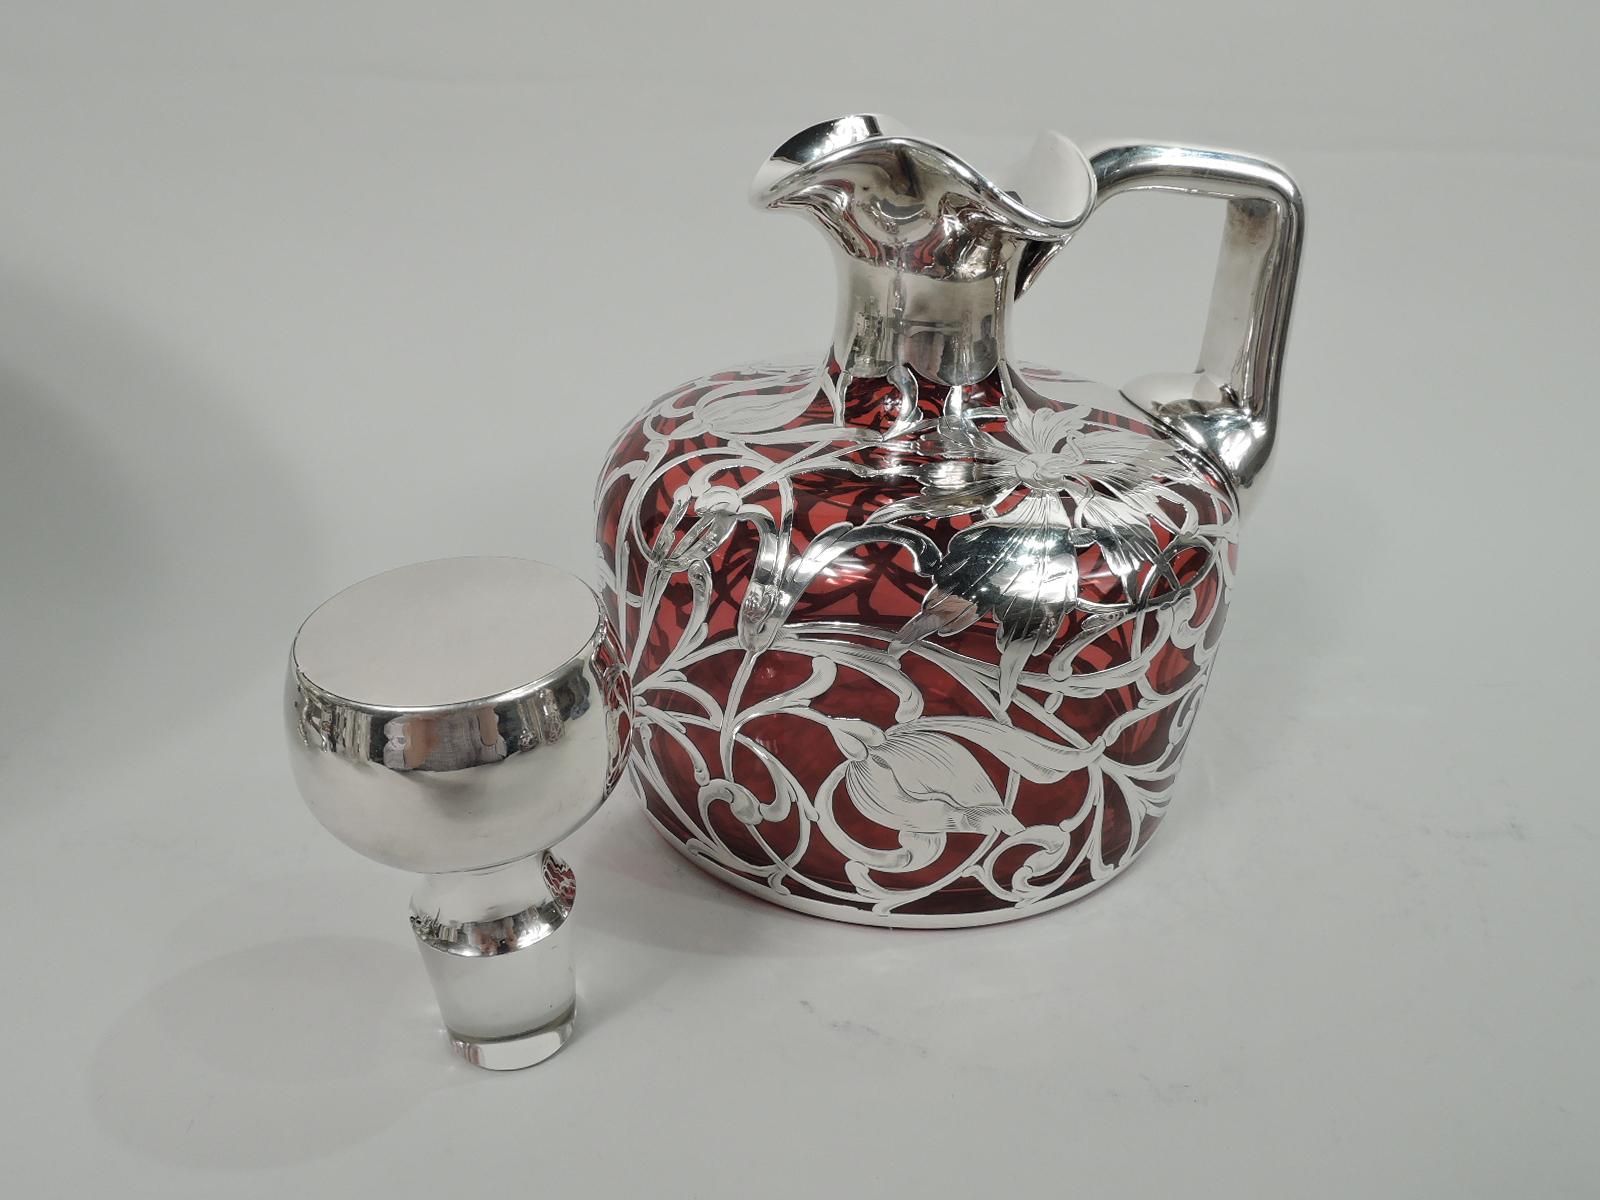 20th Century Antique American Art Nouveau Red Silver Overlay Jug Decanter